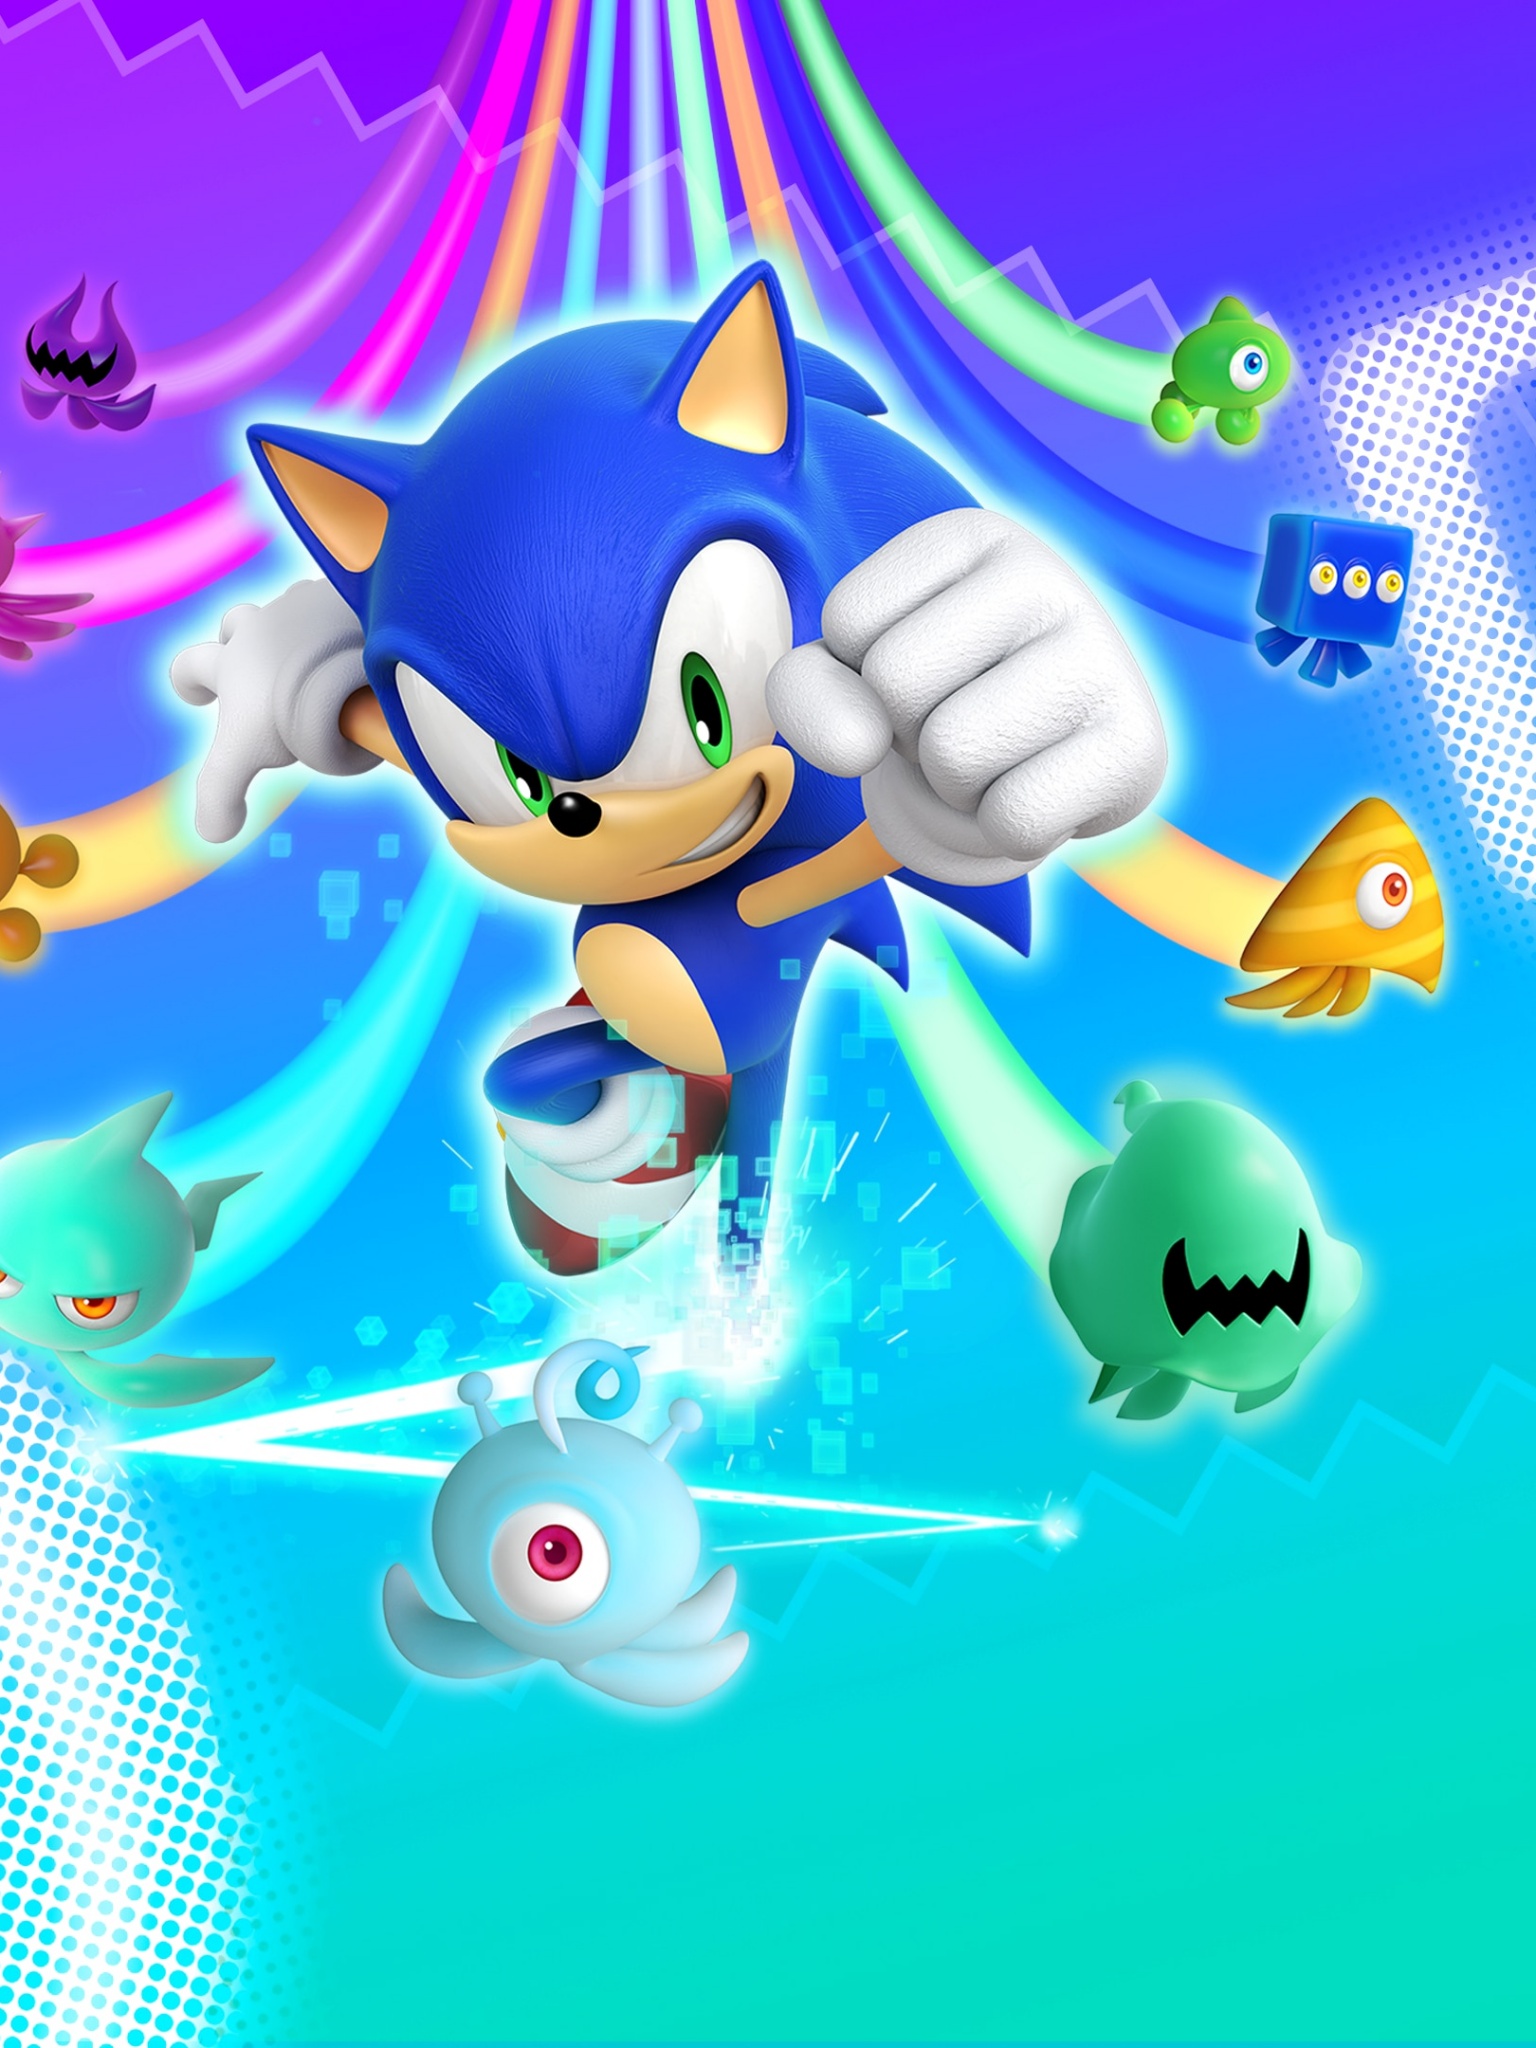 Sonic Colors: Ultimate Wallpaper 4K, 2021 Games, Nintendo Switch, Wii, Nintendo DS, Games